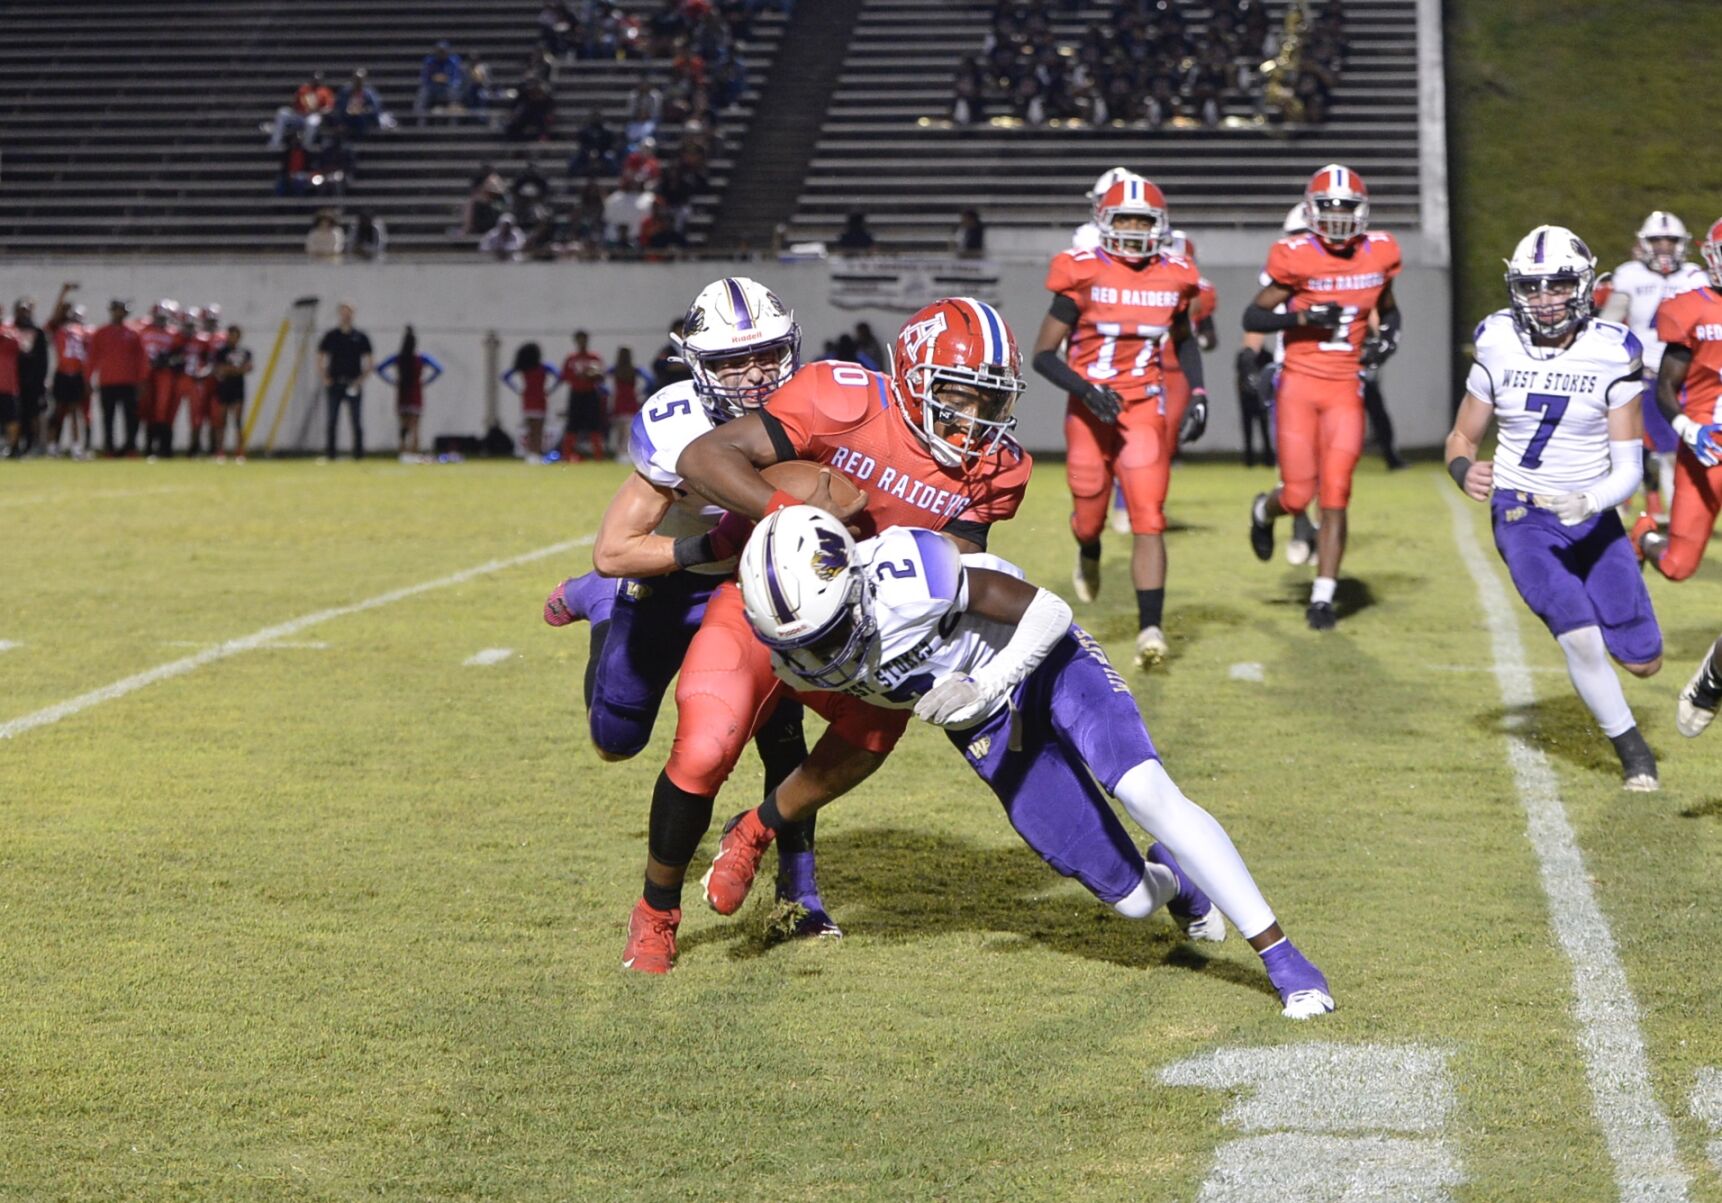 West Stokes overcomes challenges to secure back-to-back victories against T.W. Andrews